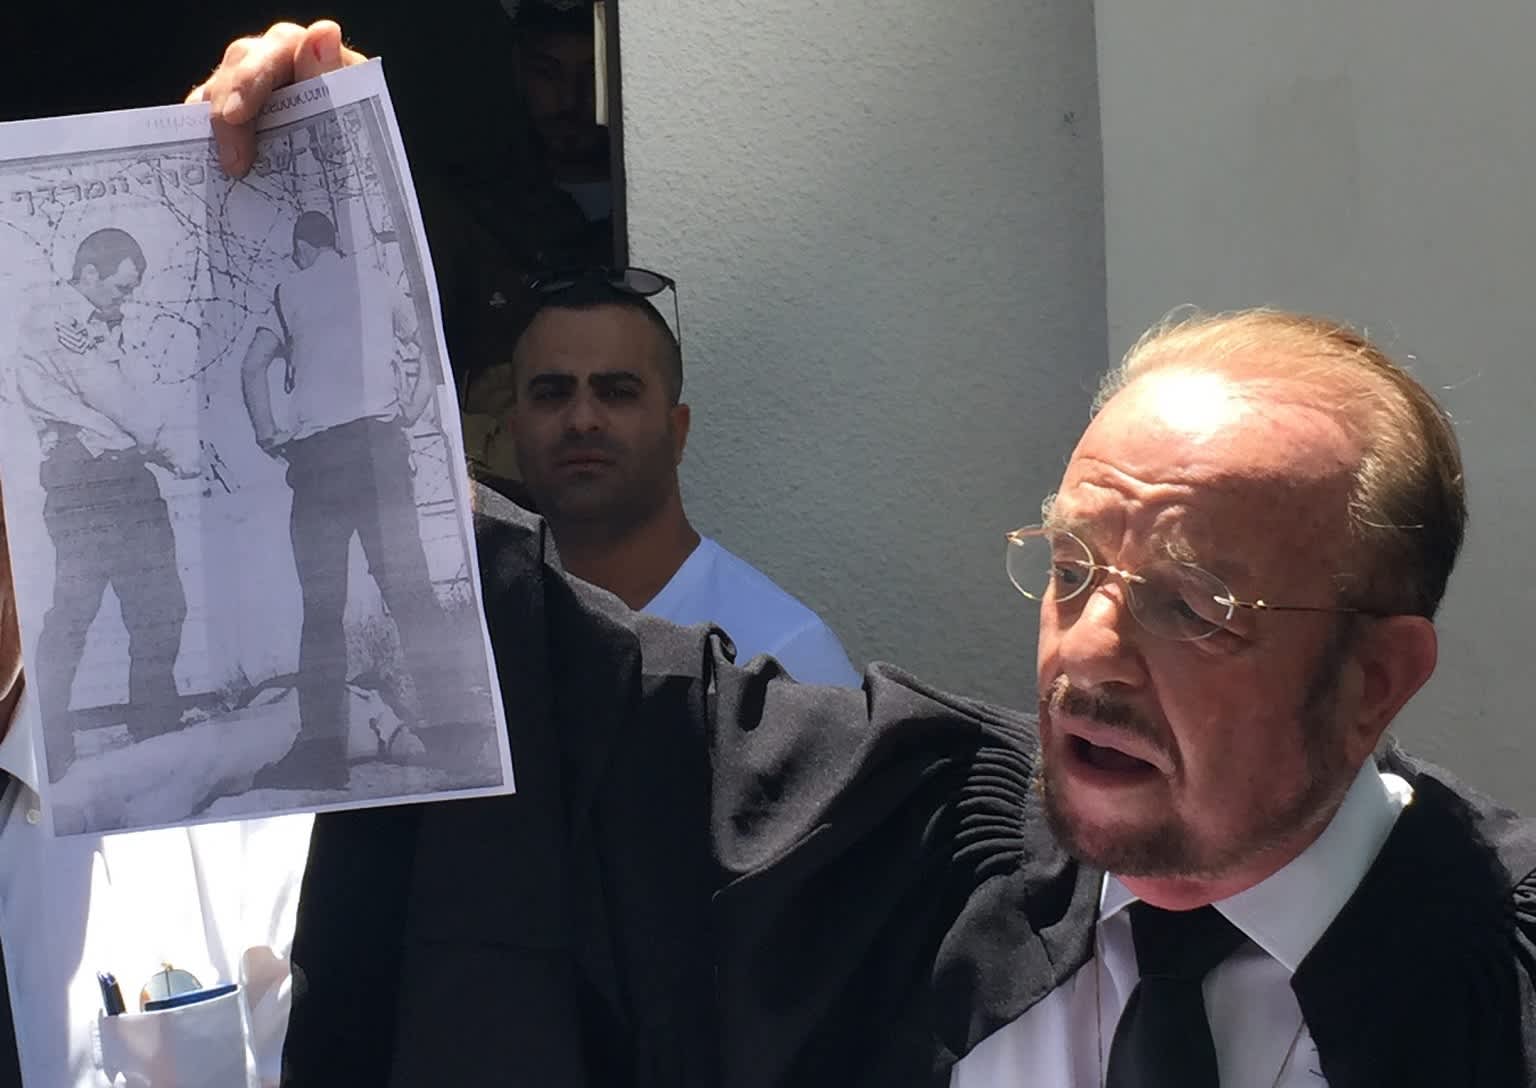 Azaria's attorney, Yoram Sheftel holding up a sign depicting a similar incident to his client's (credit: Anna Ahronheim)